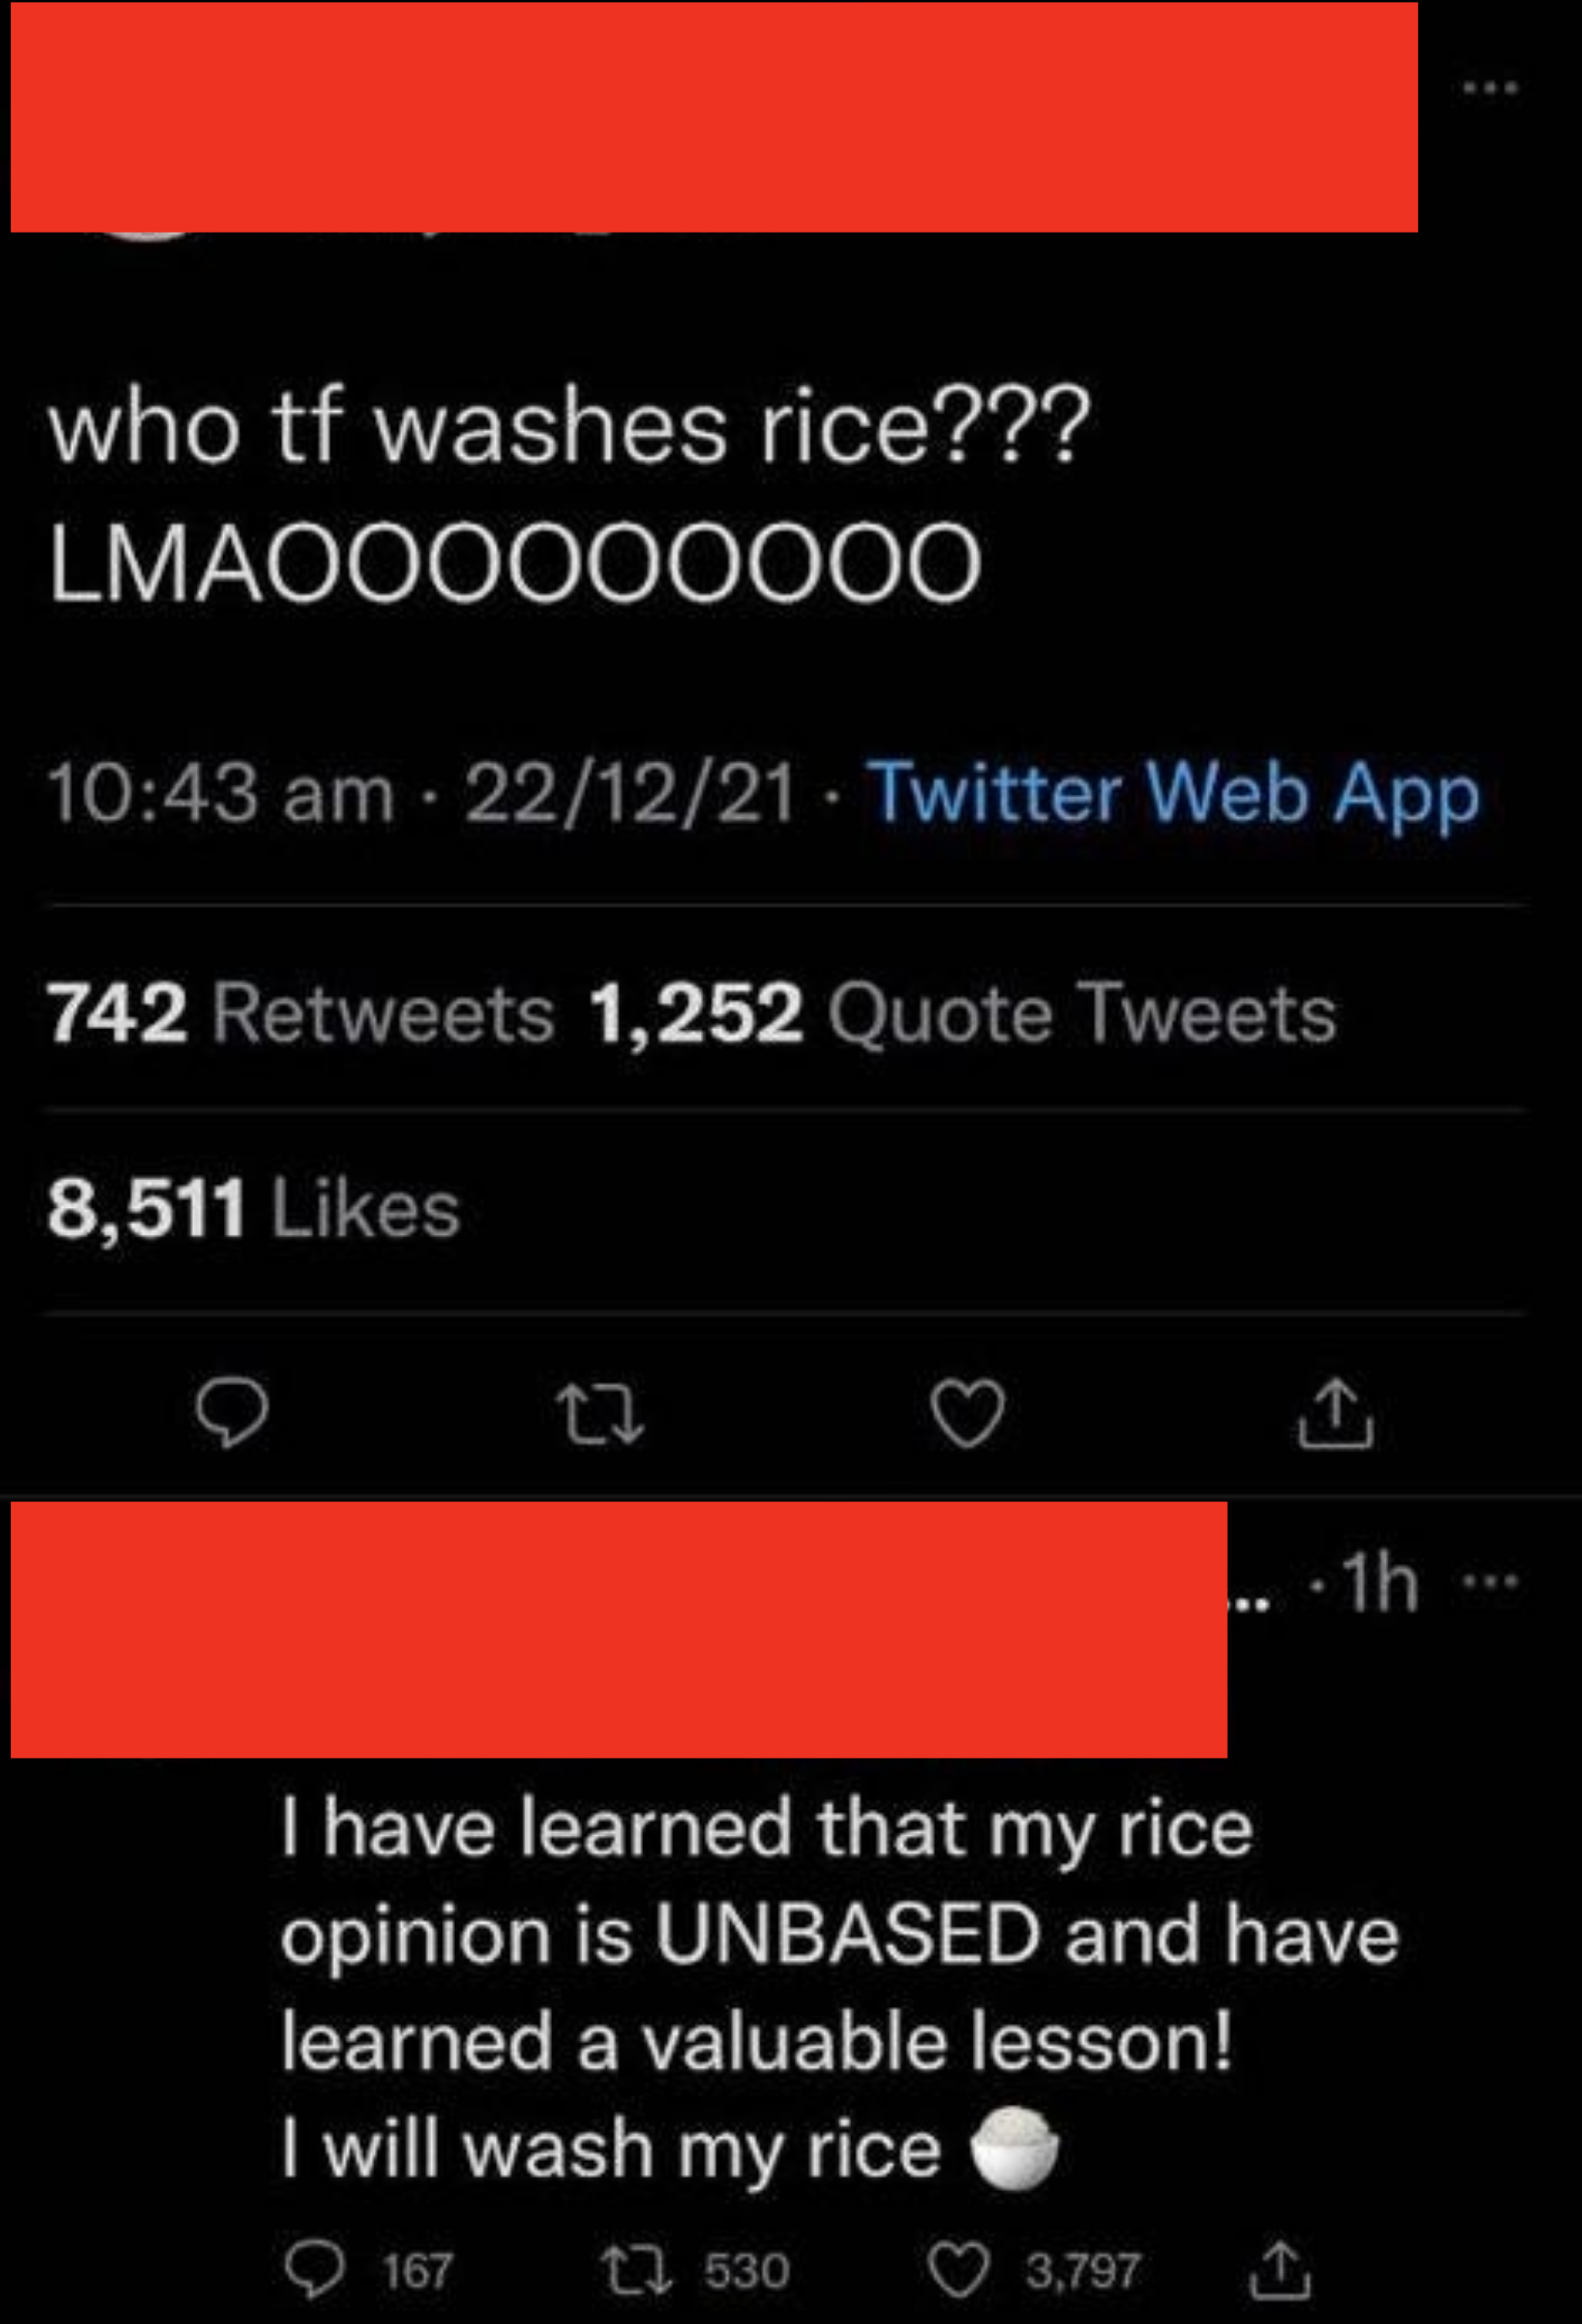 person first says why would people wash rice and then updates later to say, i have learned that my rice opinion is unbased and have learned a valuable lesson. i will wash my rice